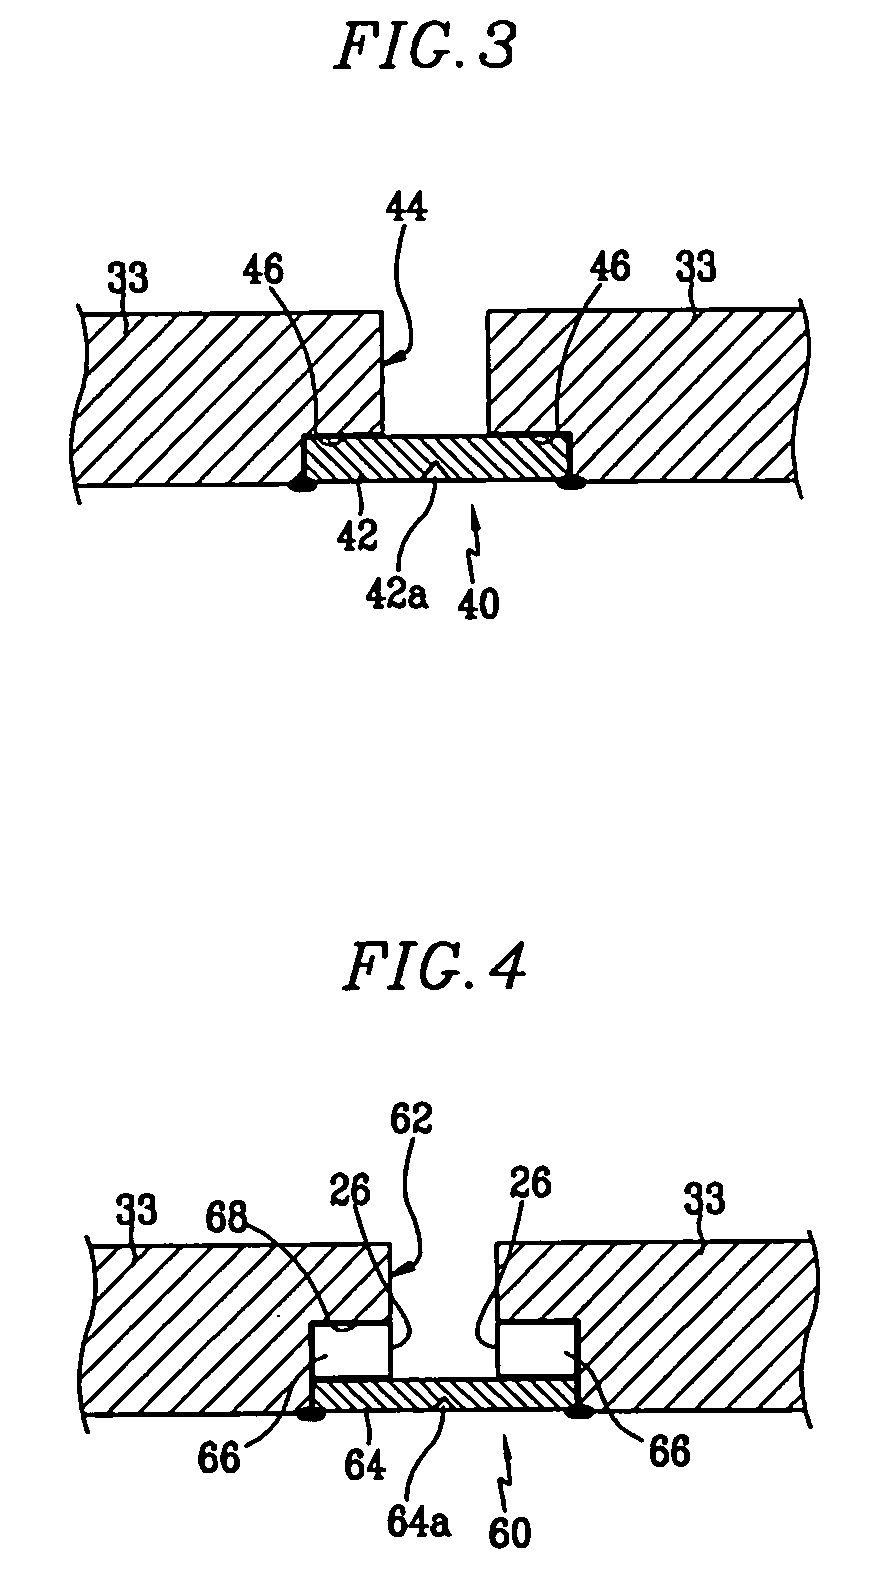 Secondary battery, cap assembly thereof and method of mounting safety valve therefor